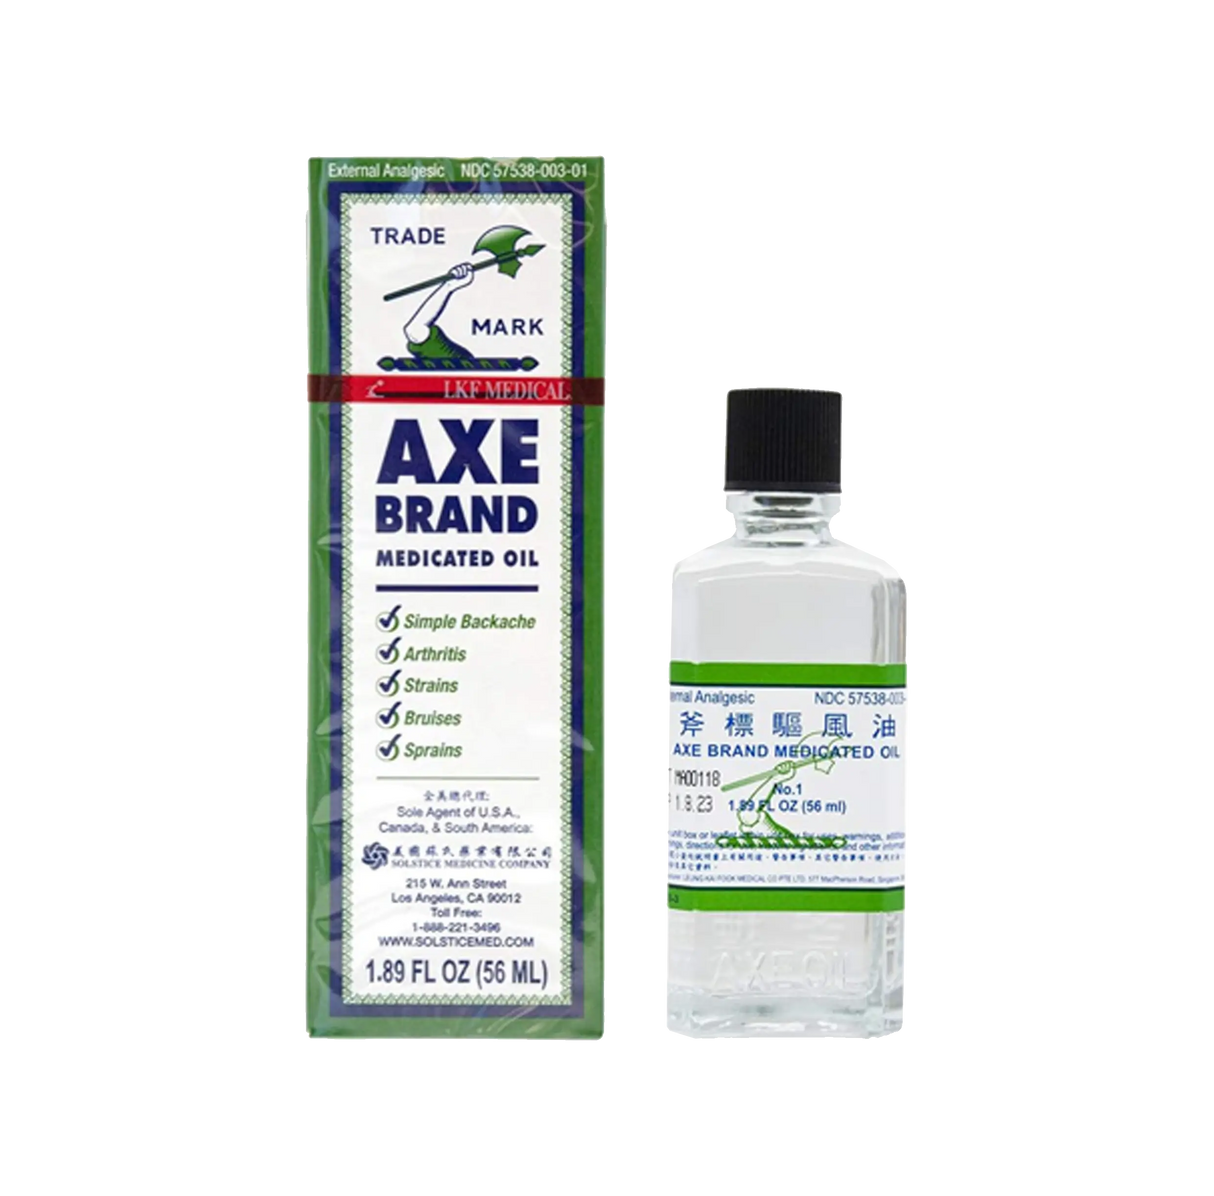 Axe Brand Medicated Oil (Muscle, Joint, and Backache Pain Relief) (1.89 fl oz/ 56 ml) (3 Bottles) (Solstice)